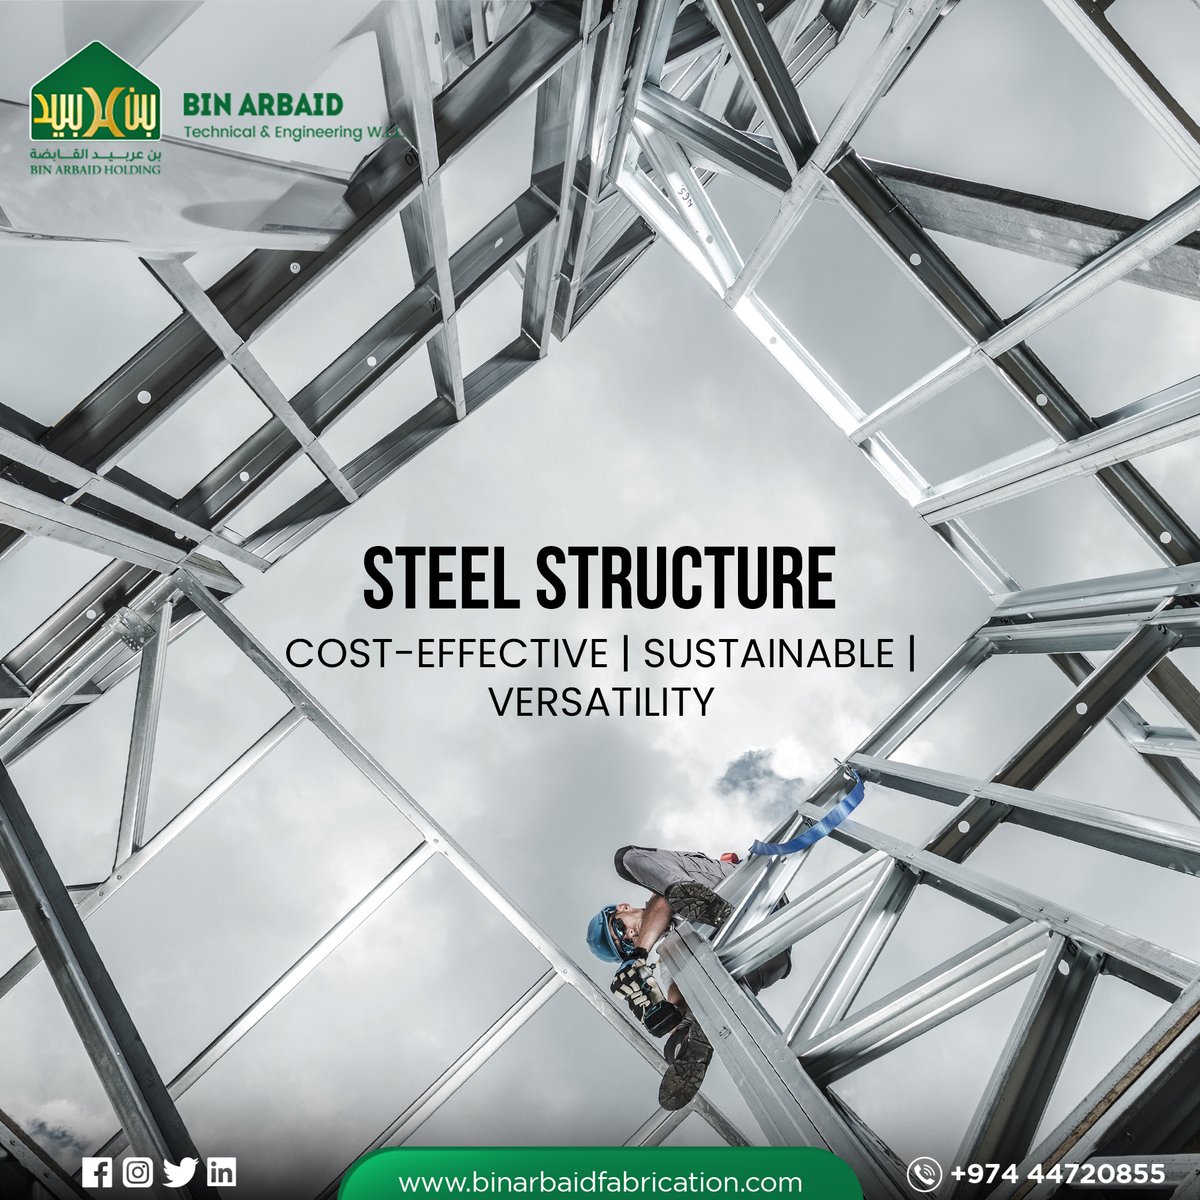 Our #commitment to sustainability, cost-effectiveness, and versatility ensures that every project is not just completed but #elevated to new heights.  

To know more, contact us on:   
📞 +974 44720855    
📧 info@binarbaidfabrication.com